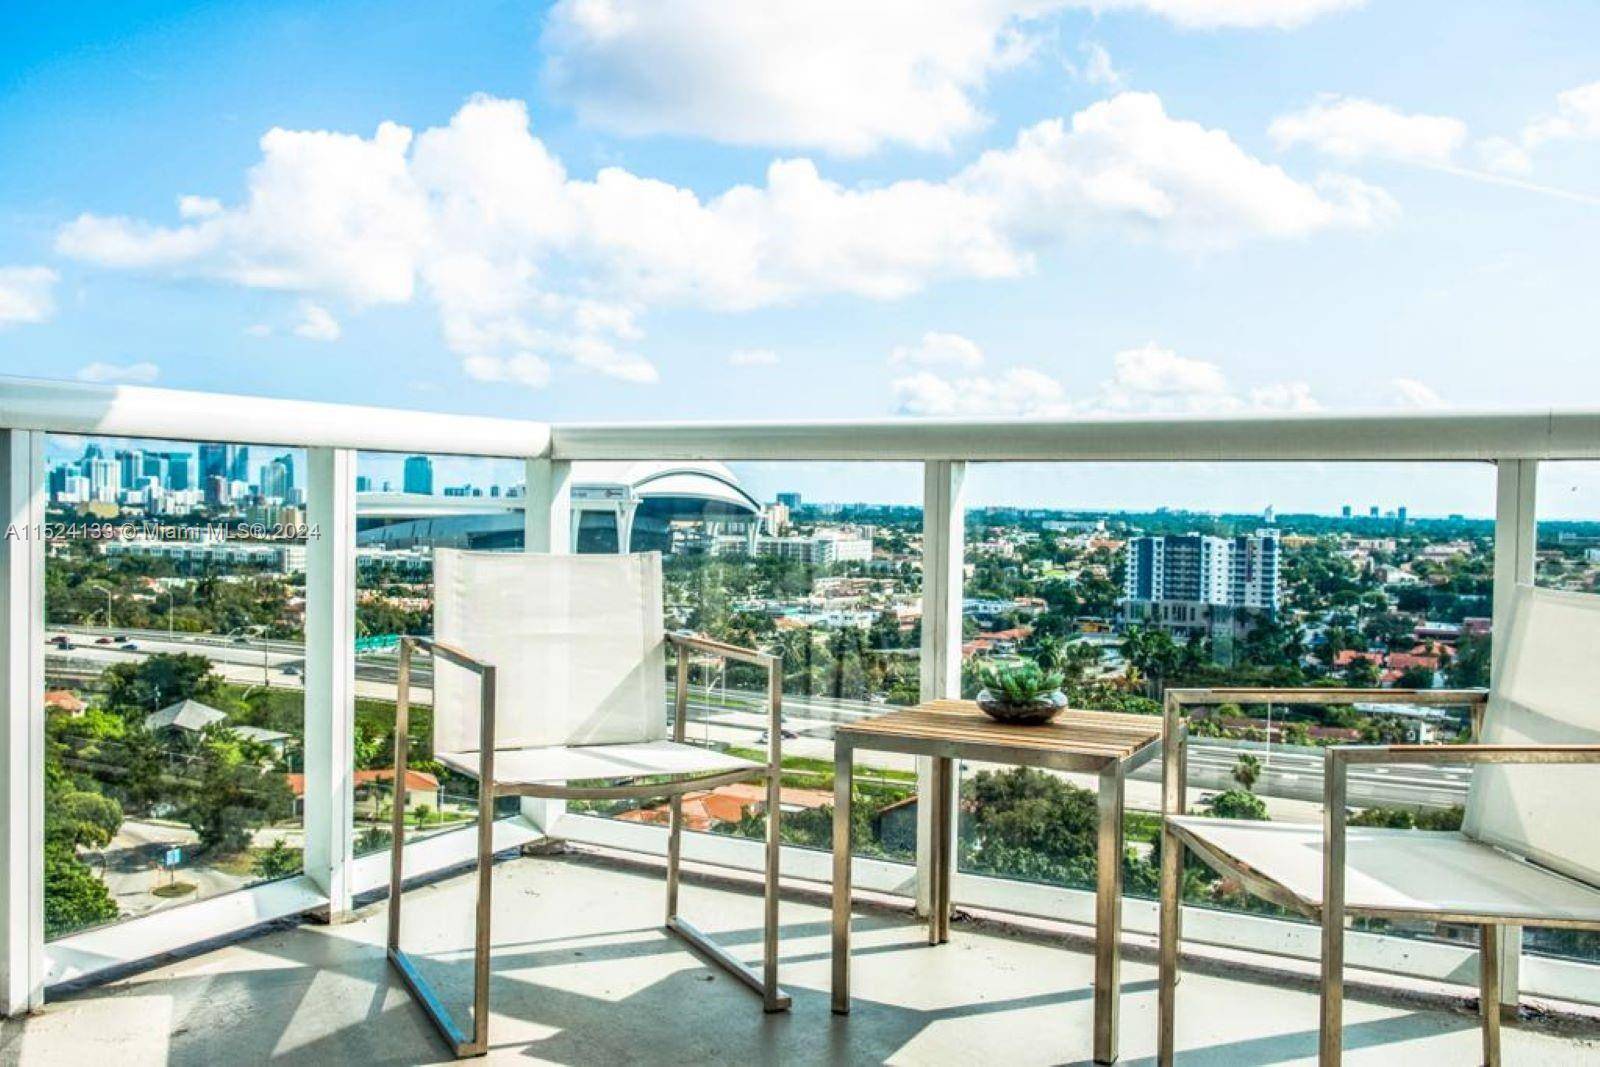 Luxury 1 bedroom Den 2 baths condo features open floor plan with spectacular city views, spacious balcony, stainless steel kitchen appliances and much more.